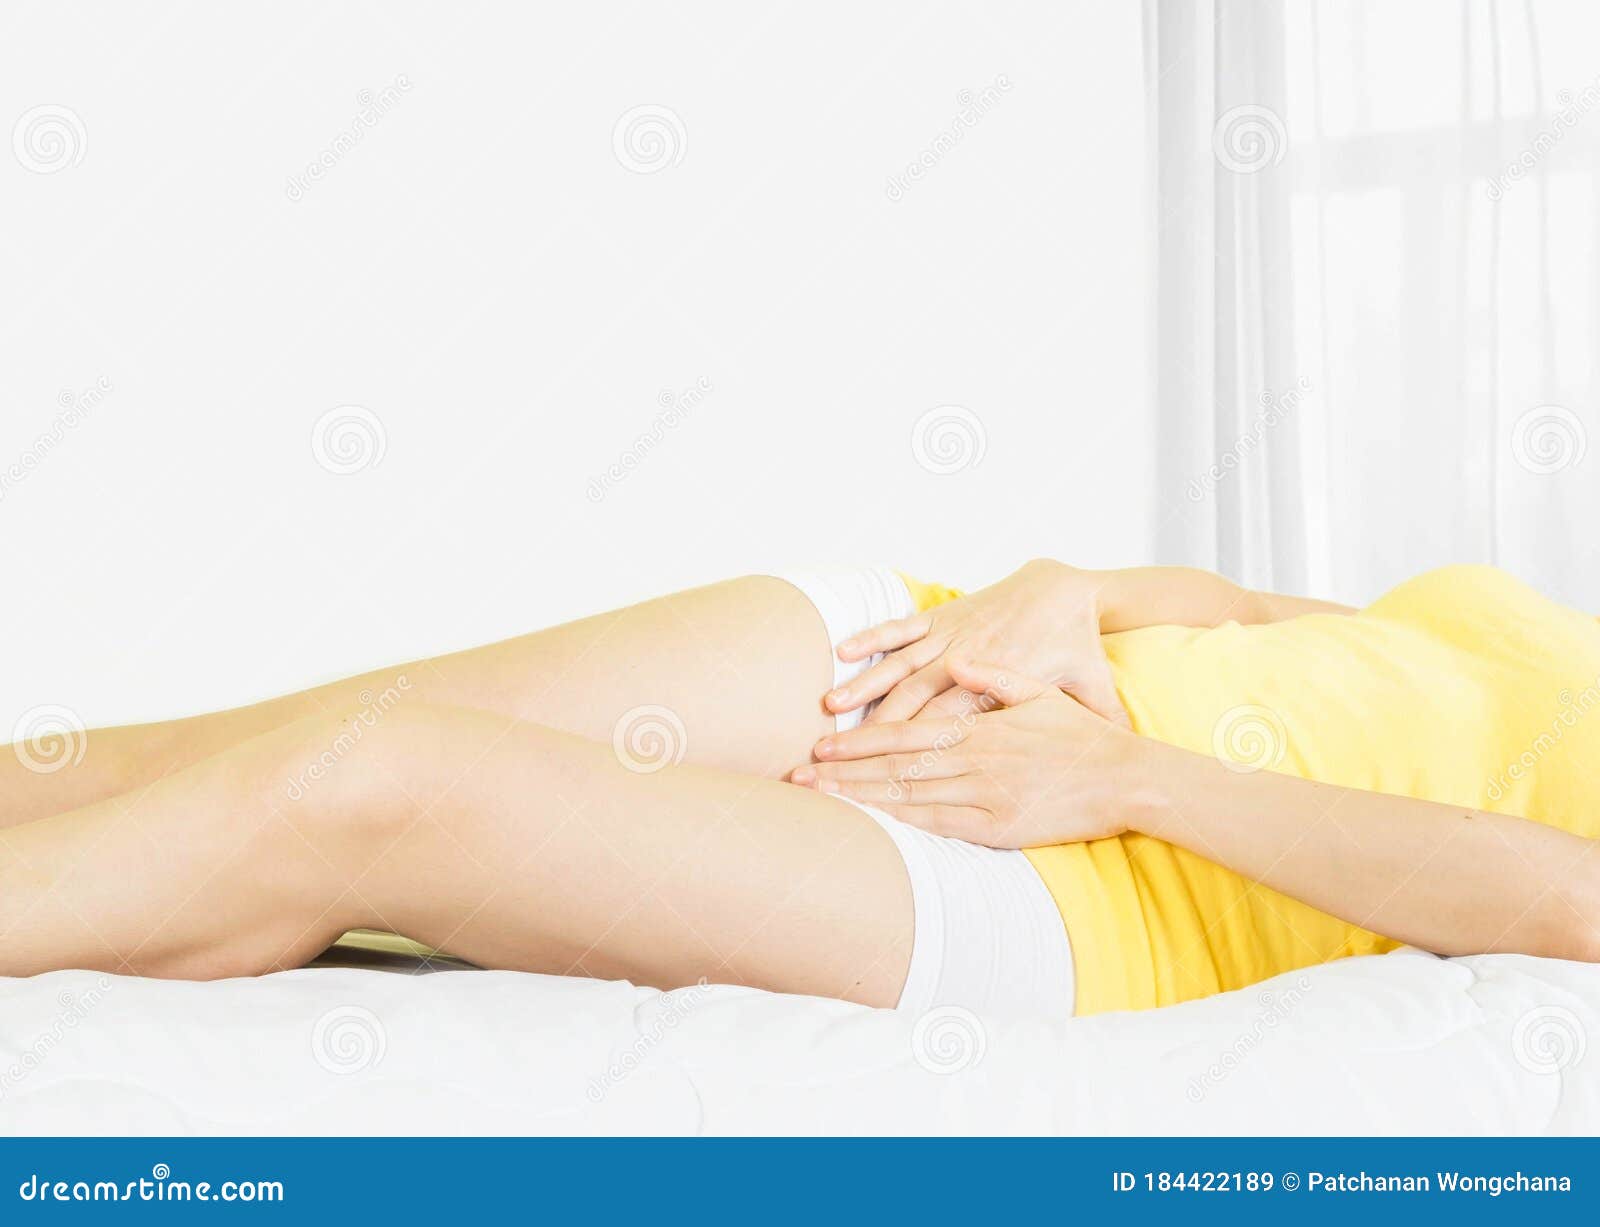 Tiny Little Asian Pussy - Young Asian Woman Wearing Yellow Undershirt Sitting on a White Bed by the  Window with a Thin Curtain Female Holding Hand To Crotch Stock Image -  Image of illness, ache: 184422189